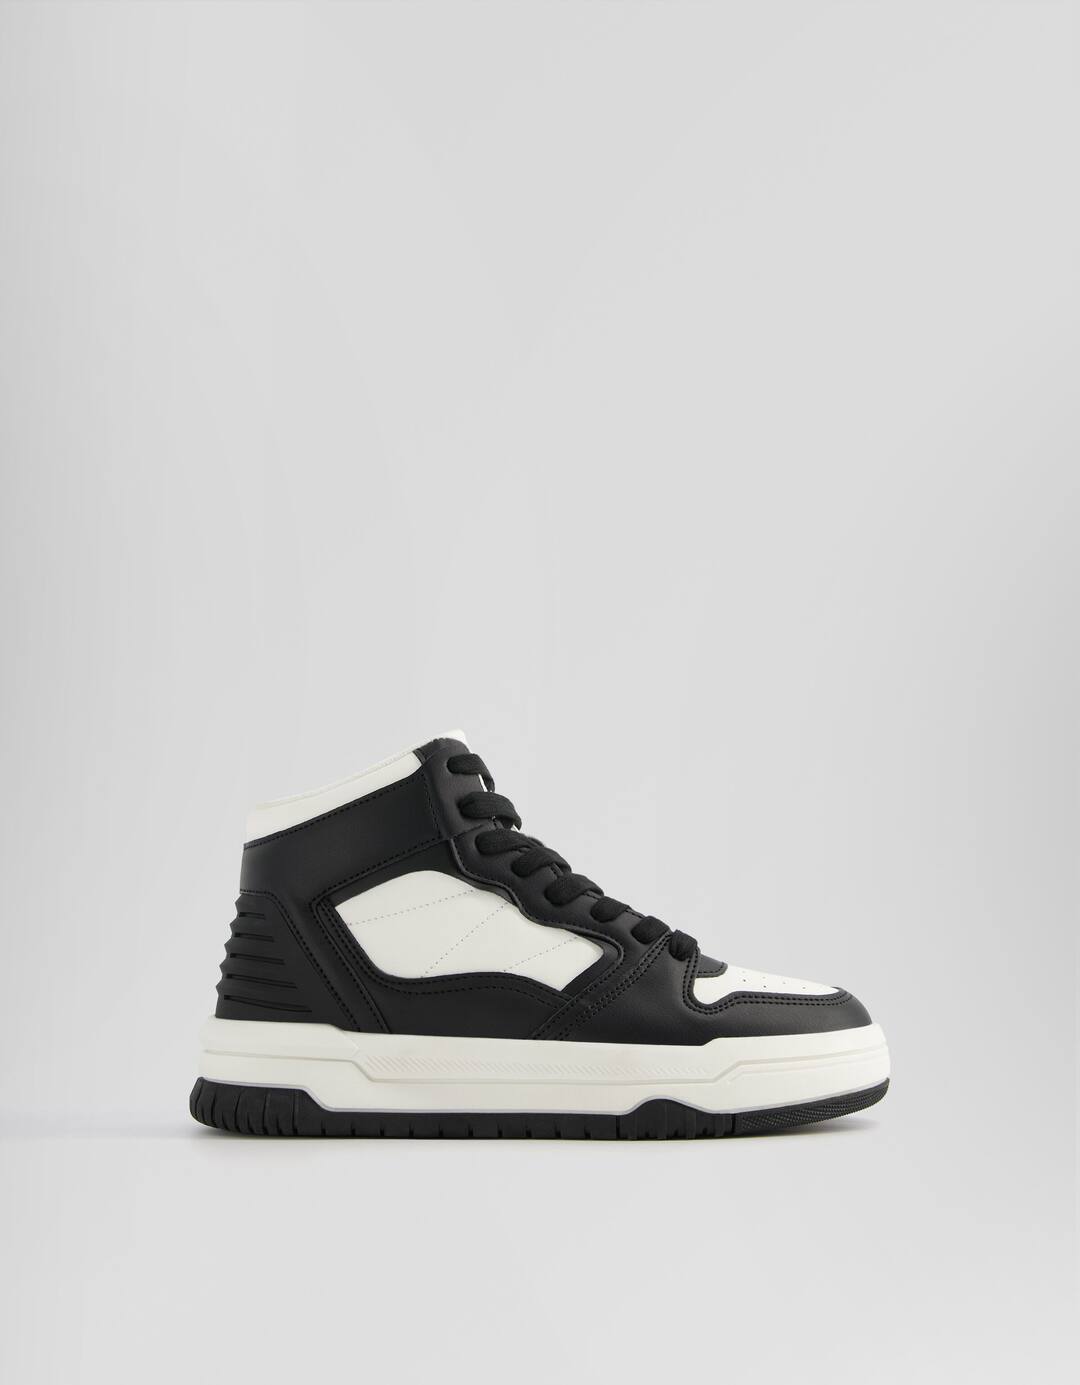 Men’s rubberised basketball-style high-top trainers